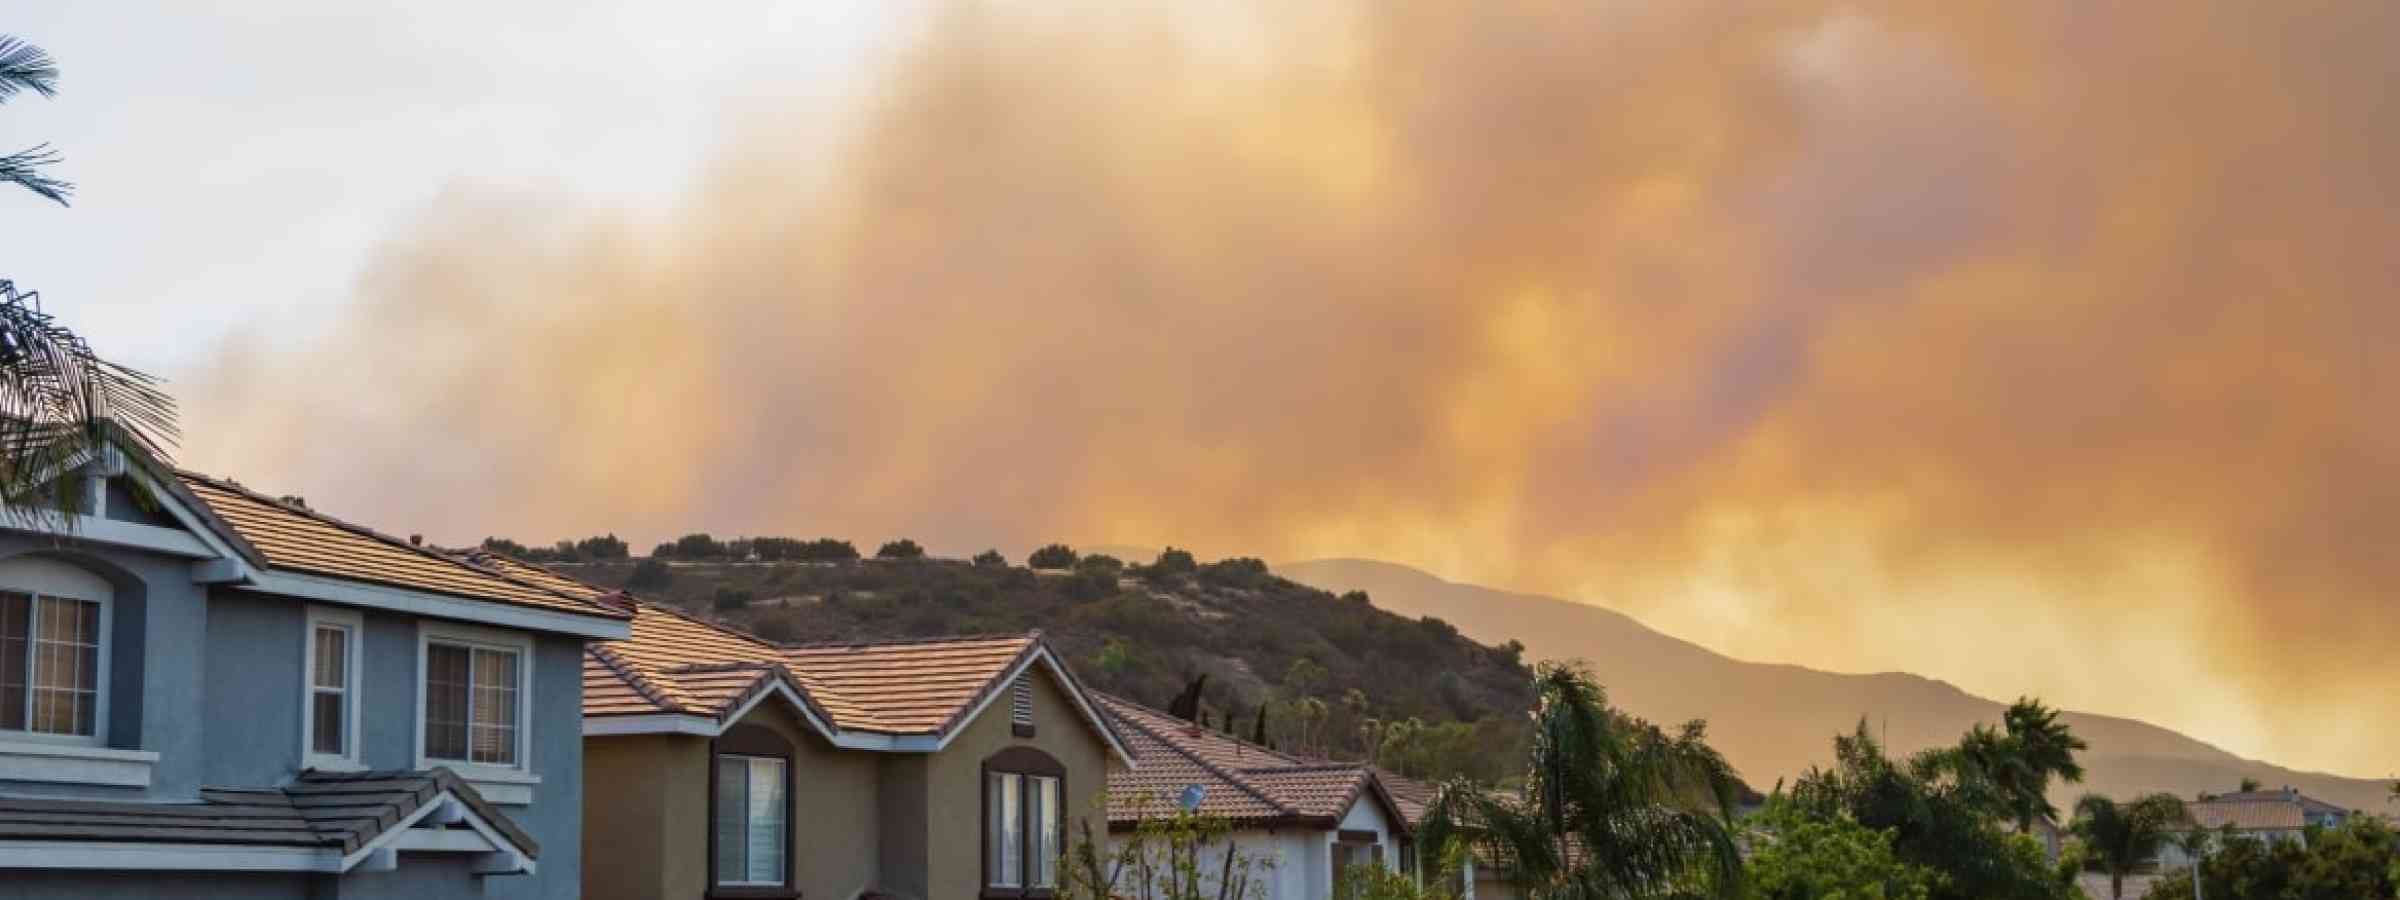 Houses with wildfire smoke in the background